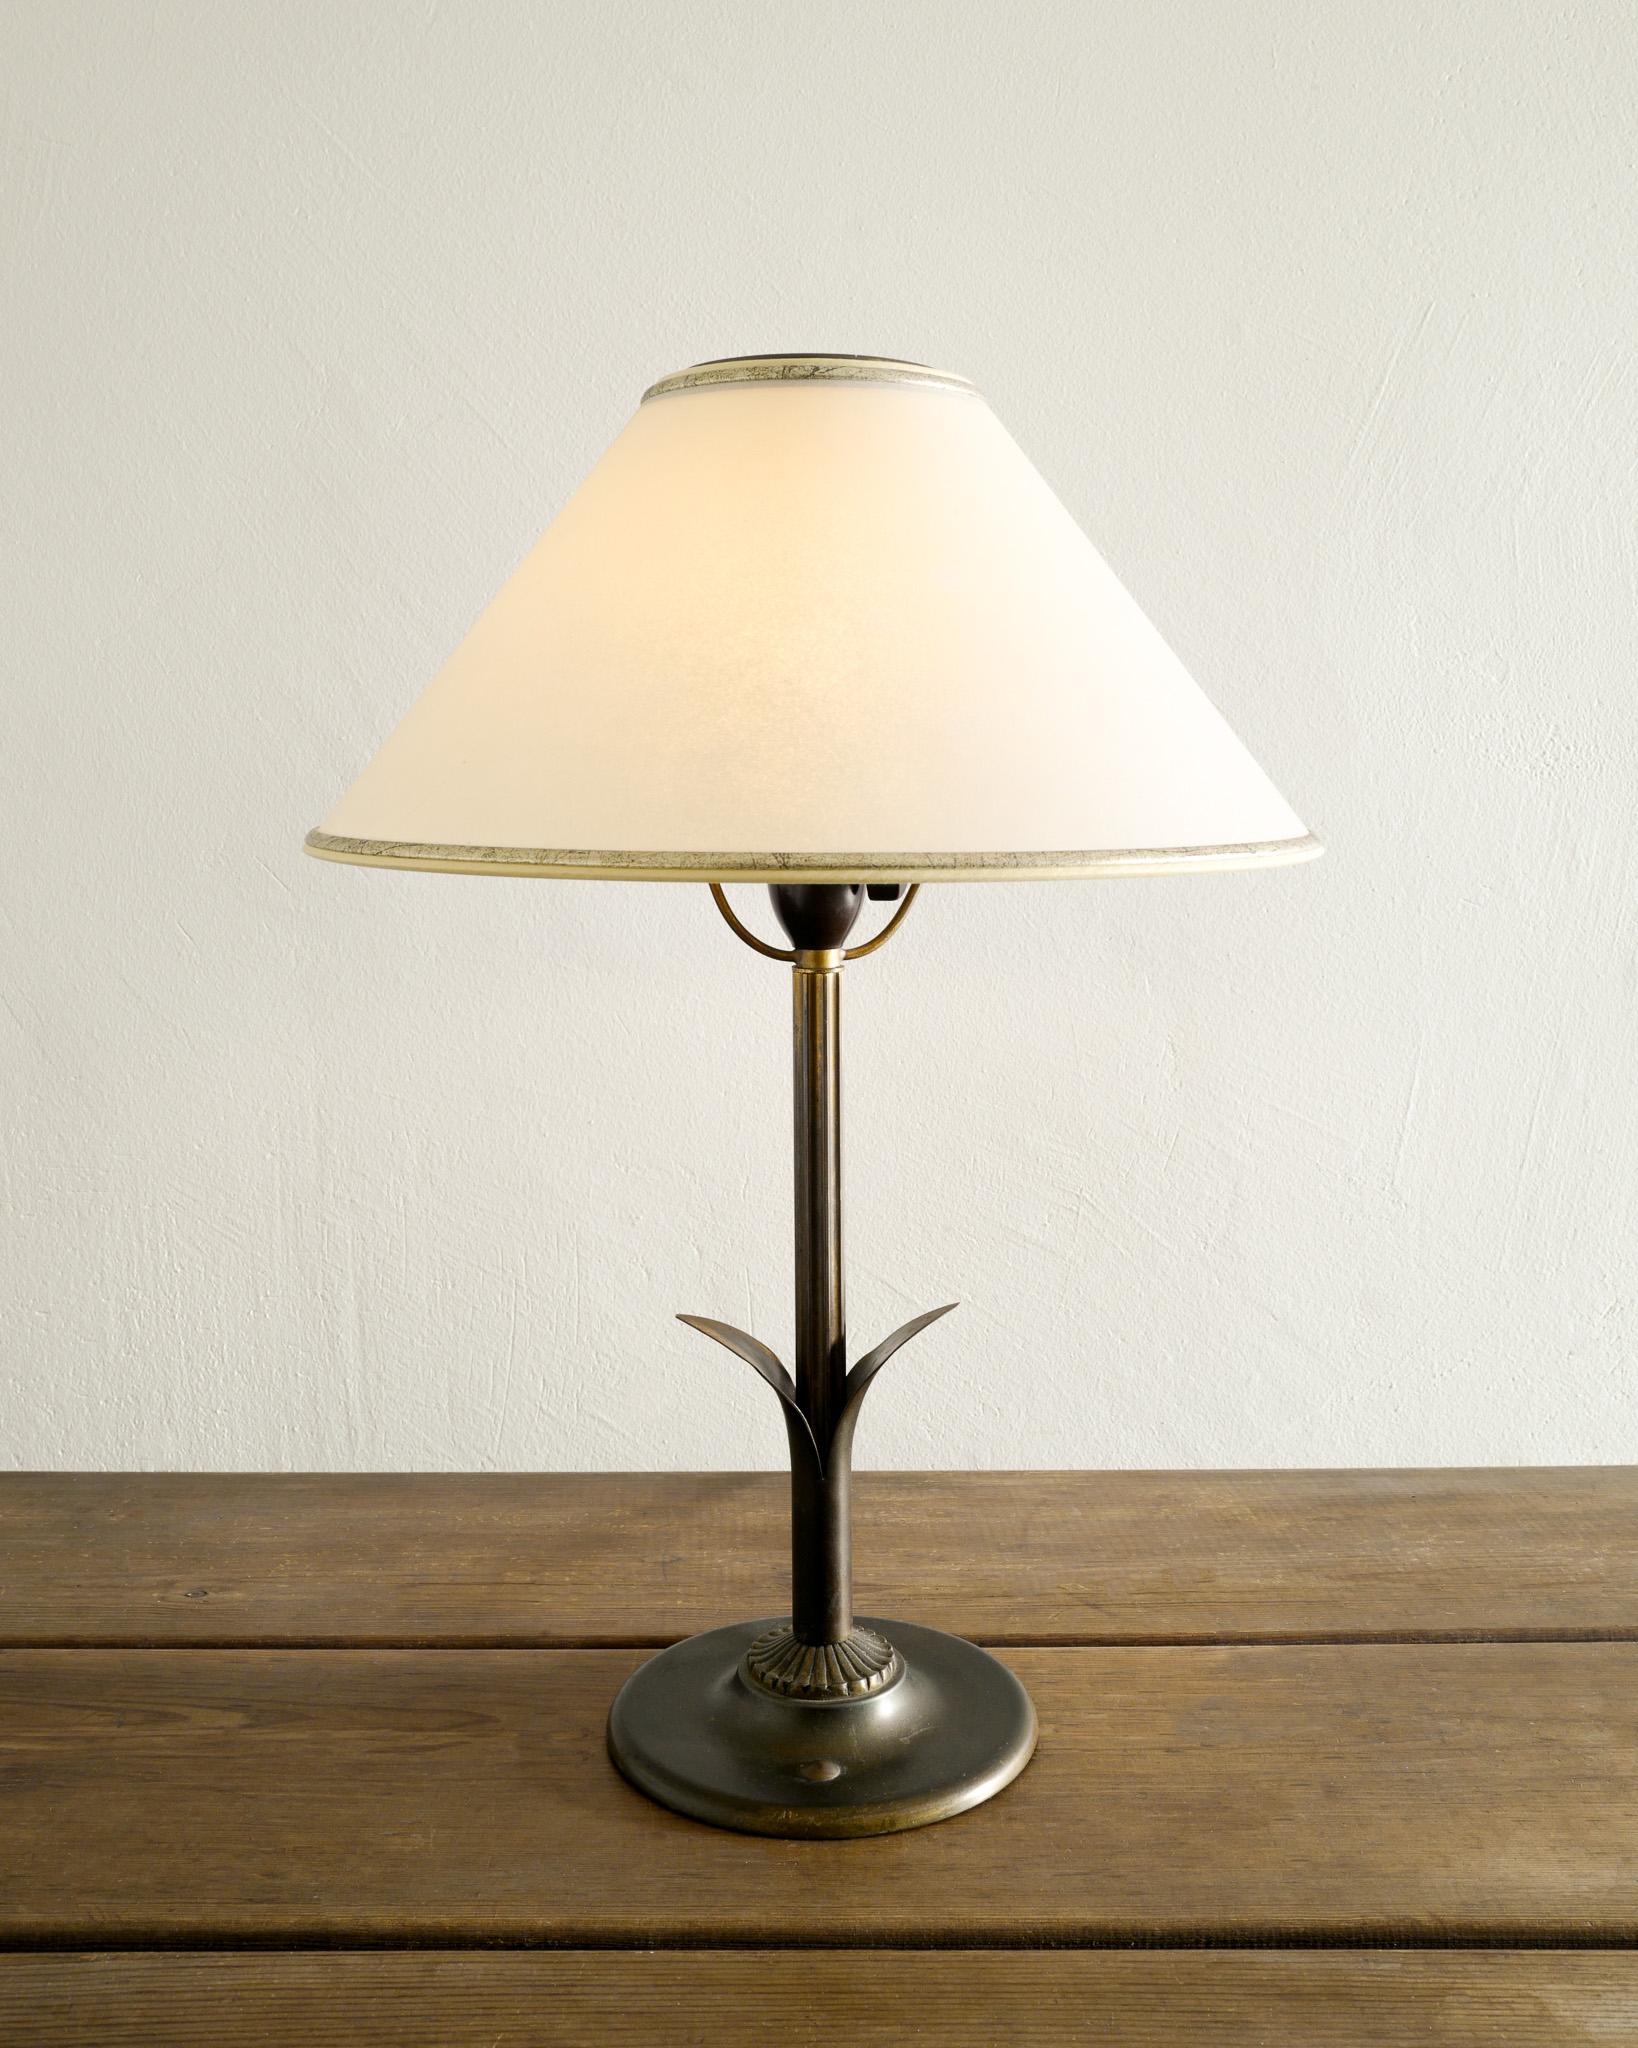 Danish Decorative Art Déco Table Lamp in Bronze with Original Shade, 1930s  For Sale 2